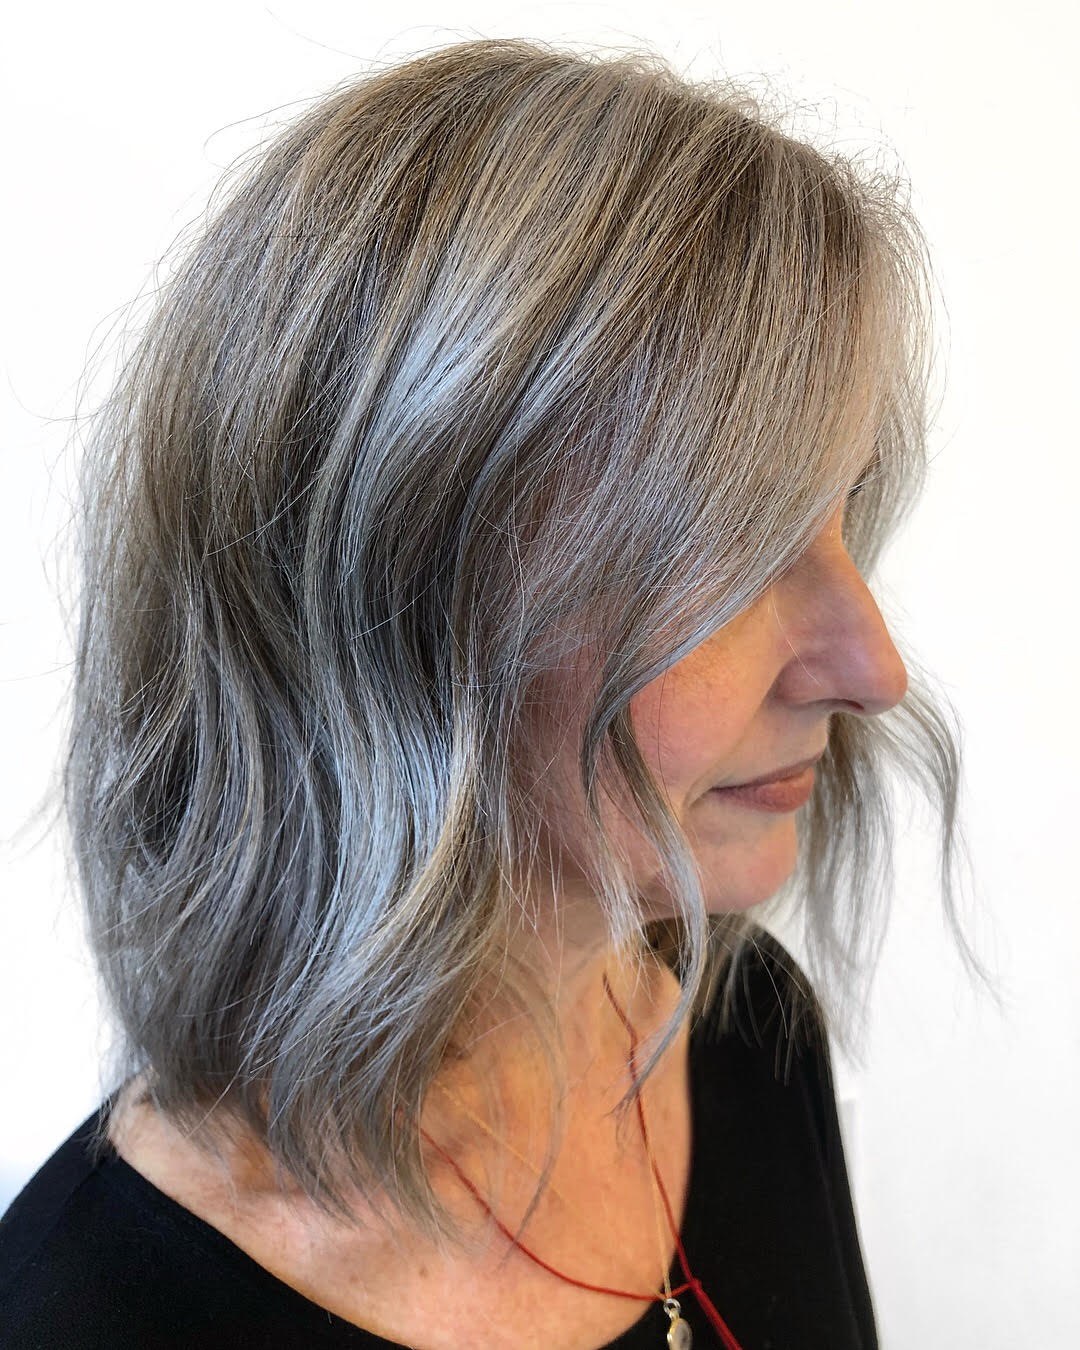 New ways of blending my gray and natural color? ⋆ Tijeras Hair Co.